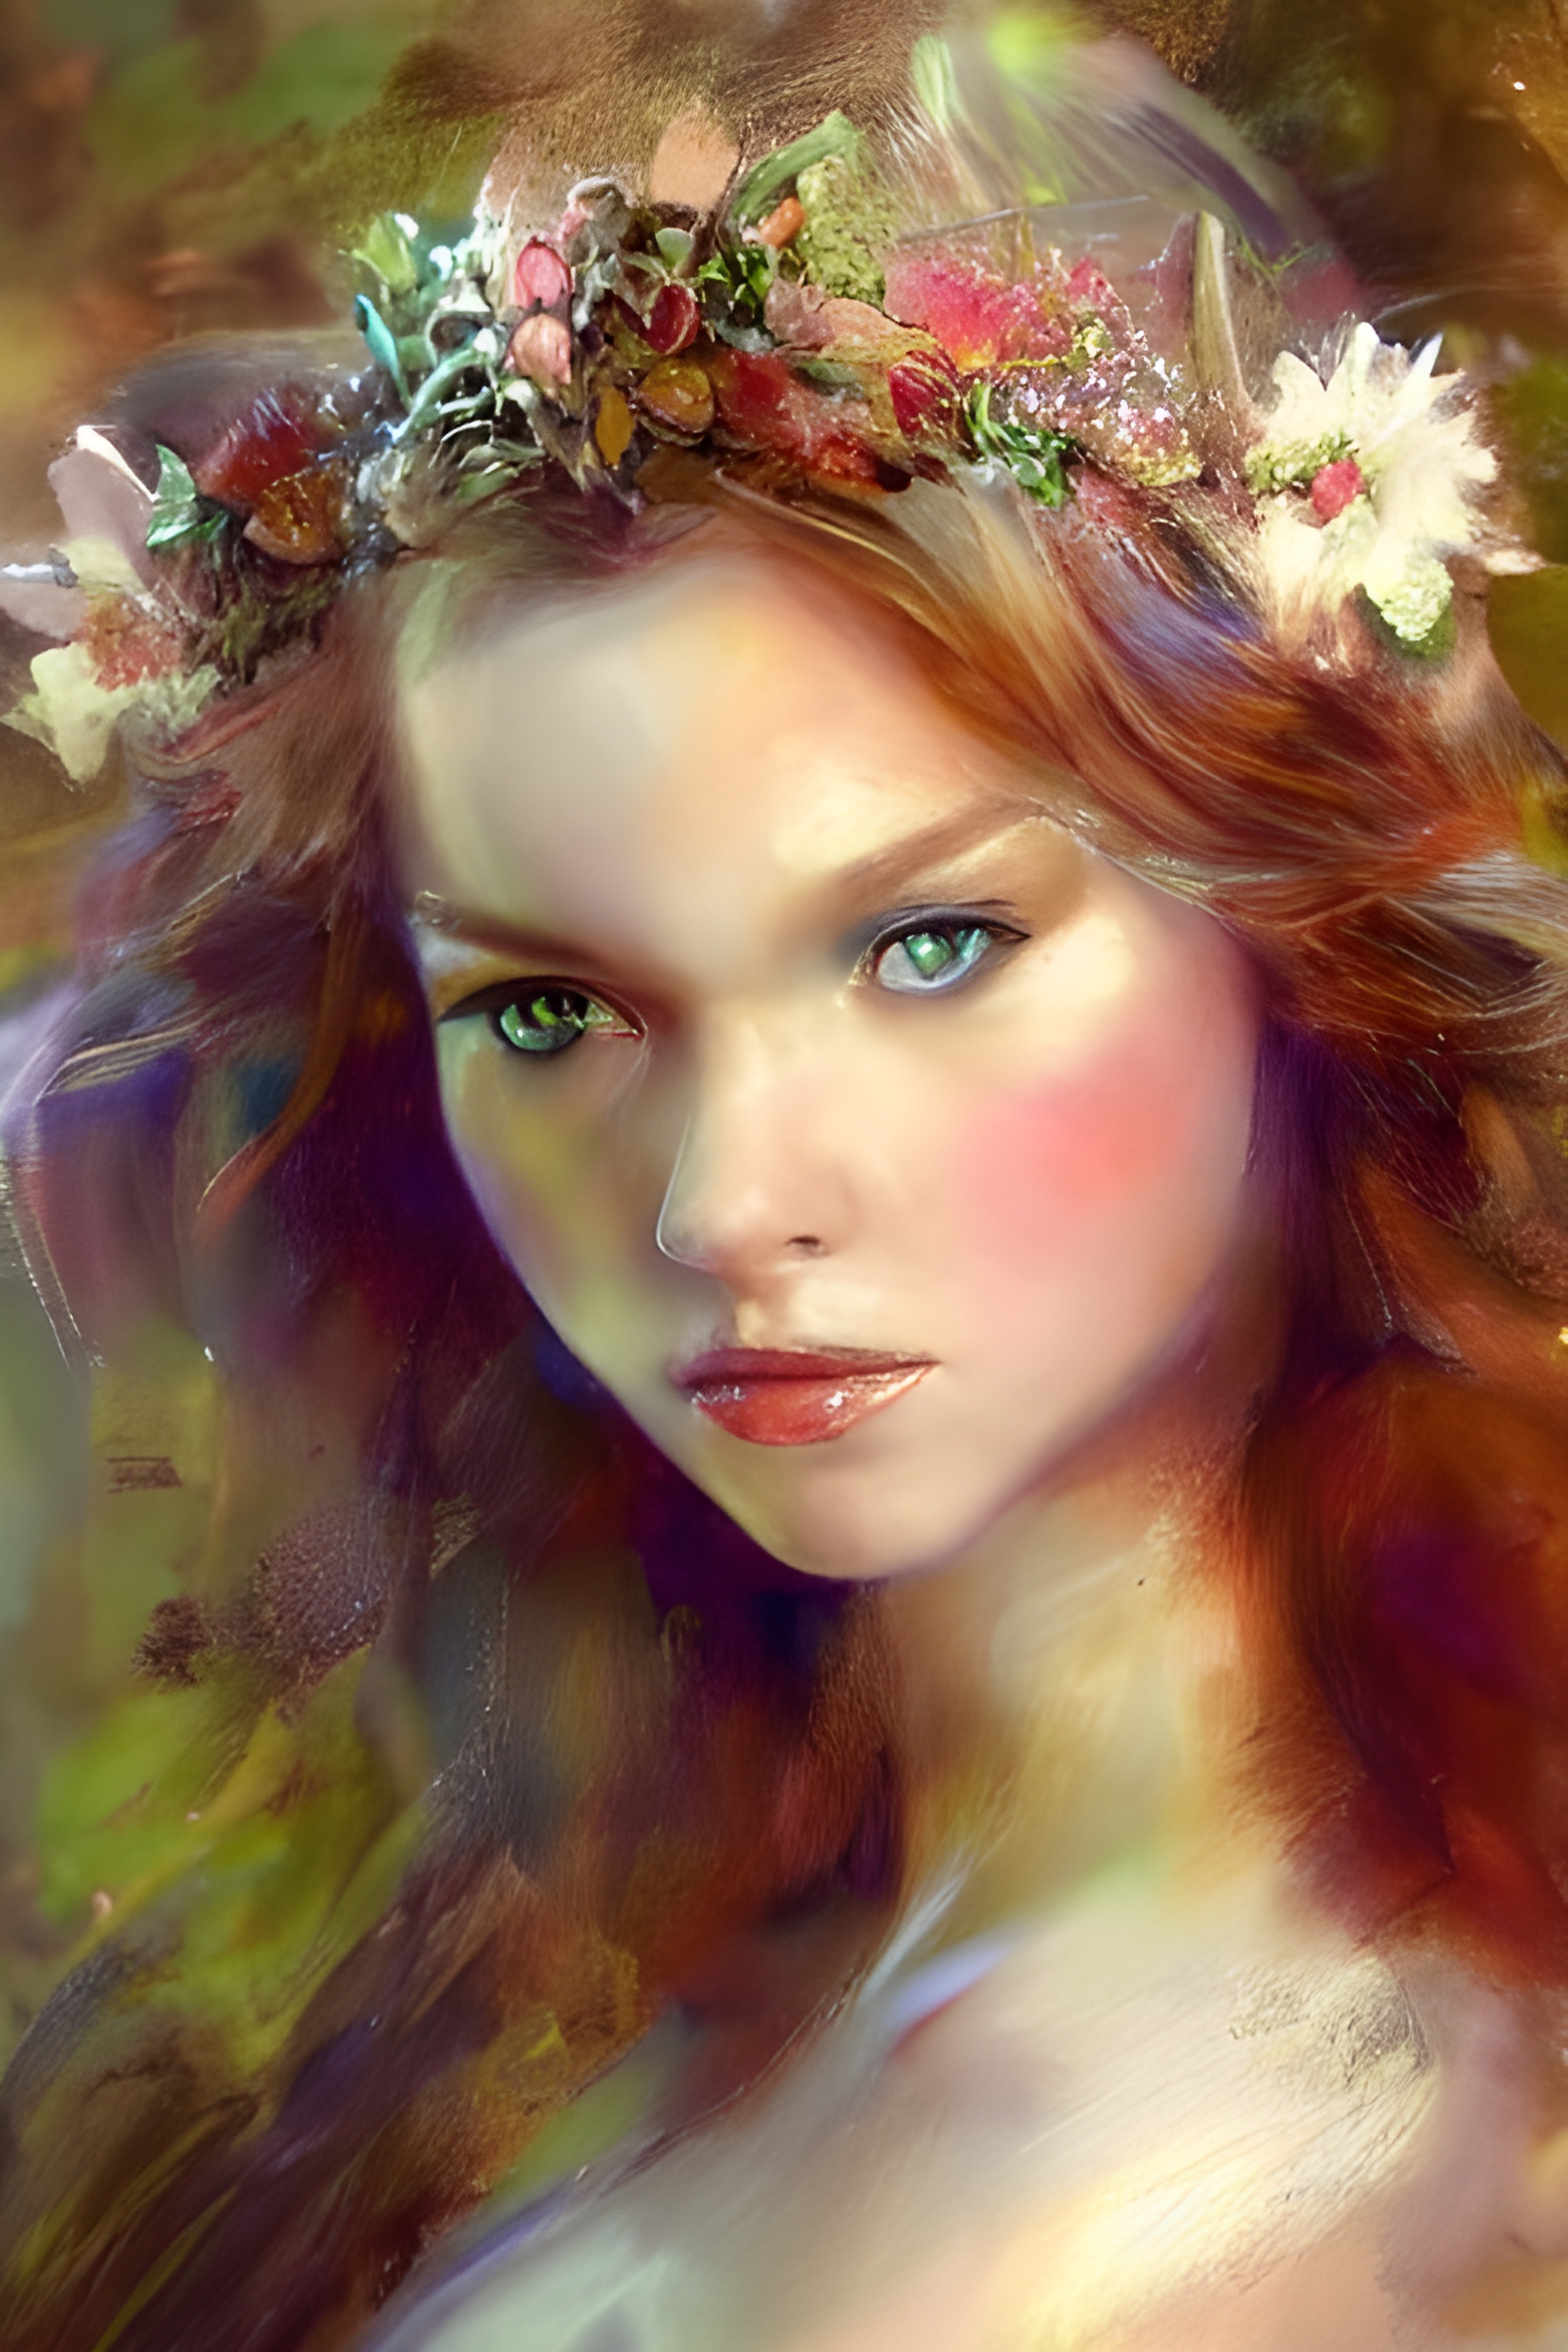 Dreamy kitschy Maiden with Flower Wreath AI Art - non-exclusive personal use